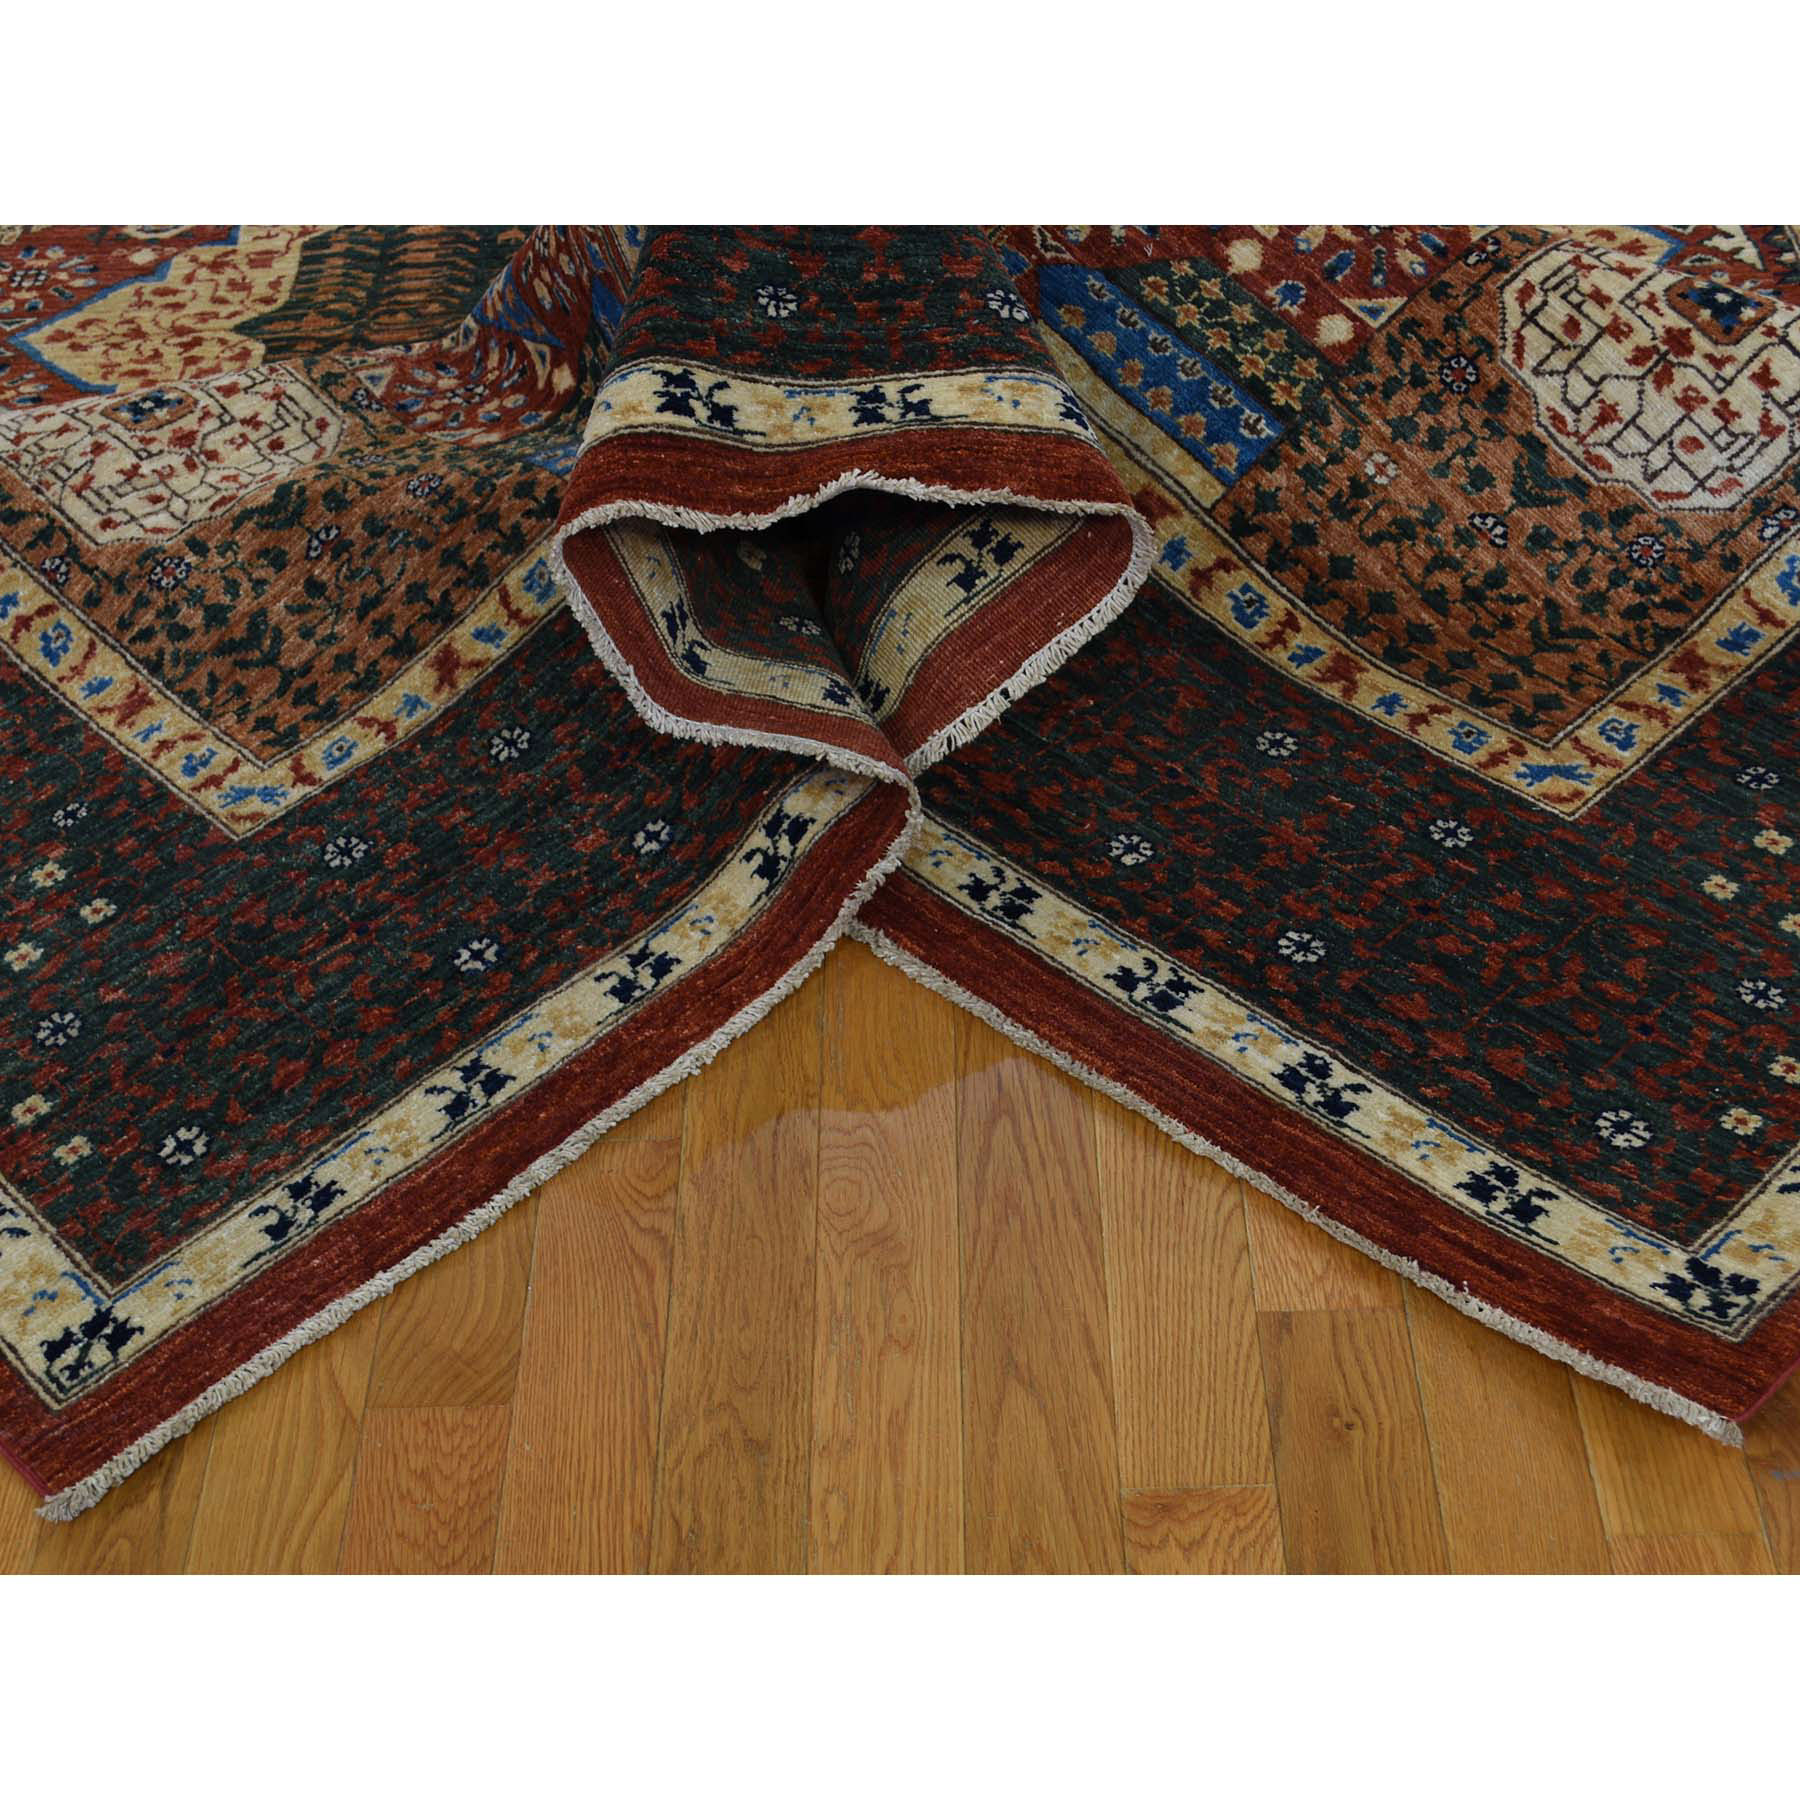 8-1 x10- Peshawar with Mamluk Design Hand-Knotted Pure Wool Oriental Rug 